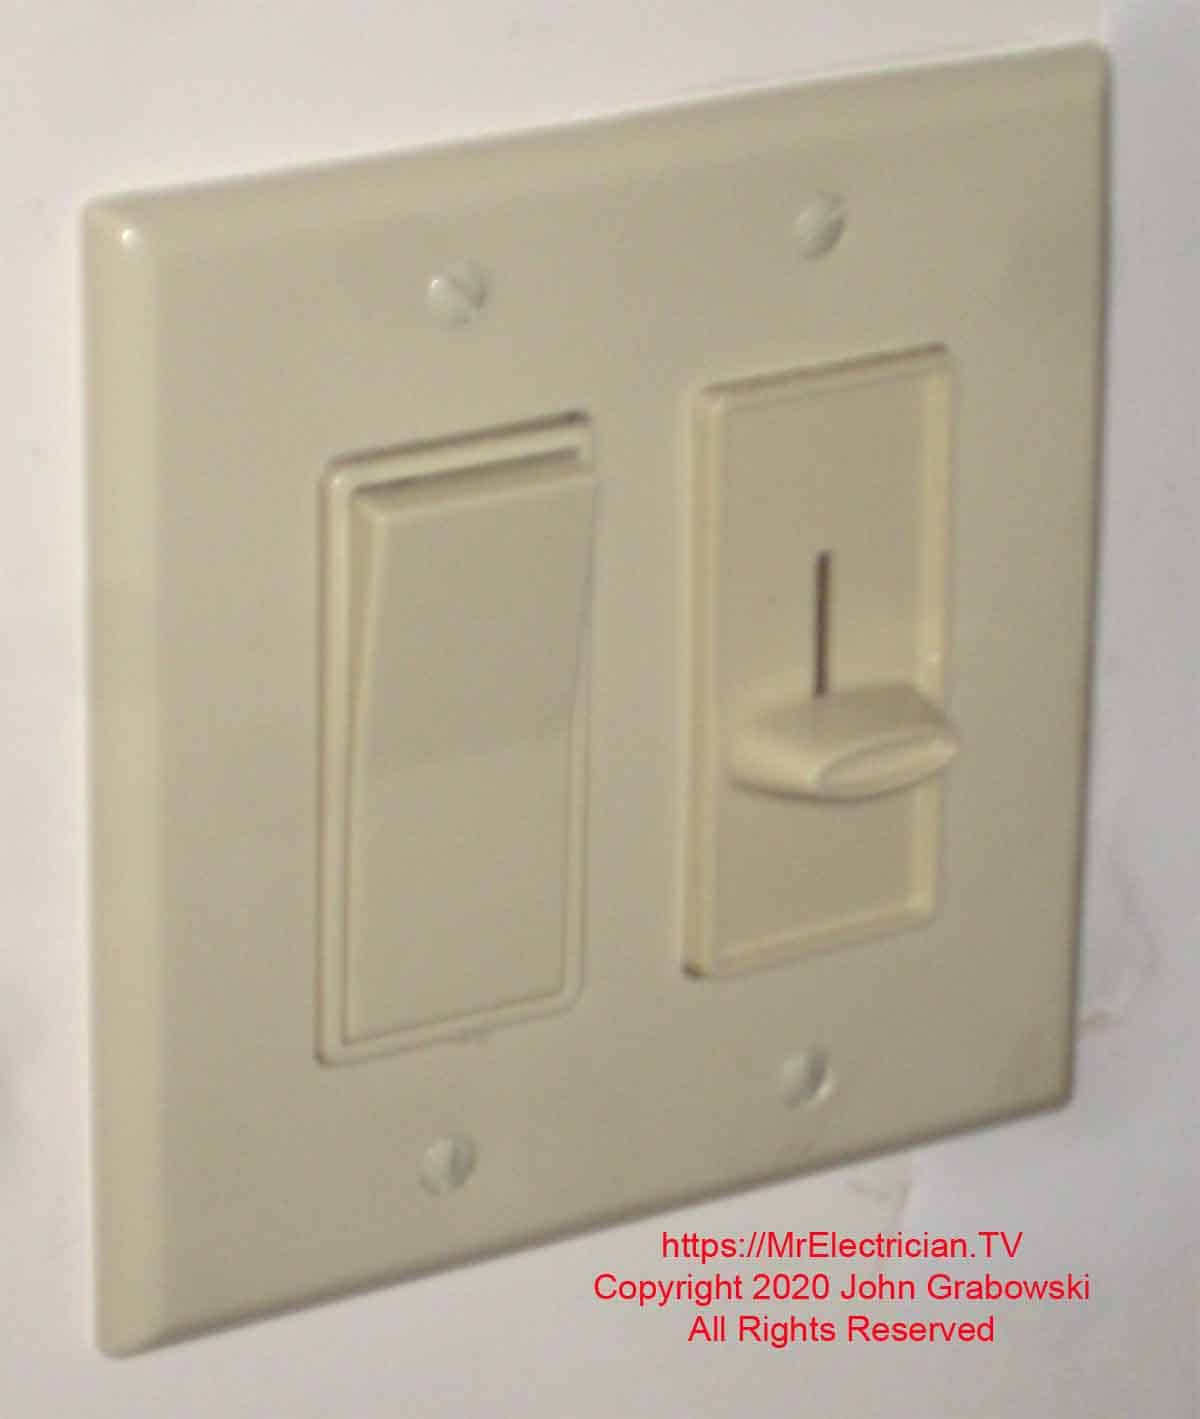 Finished wall switch and dimmer in a two gang switch box